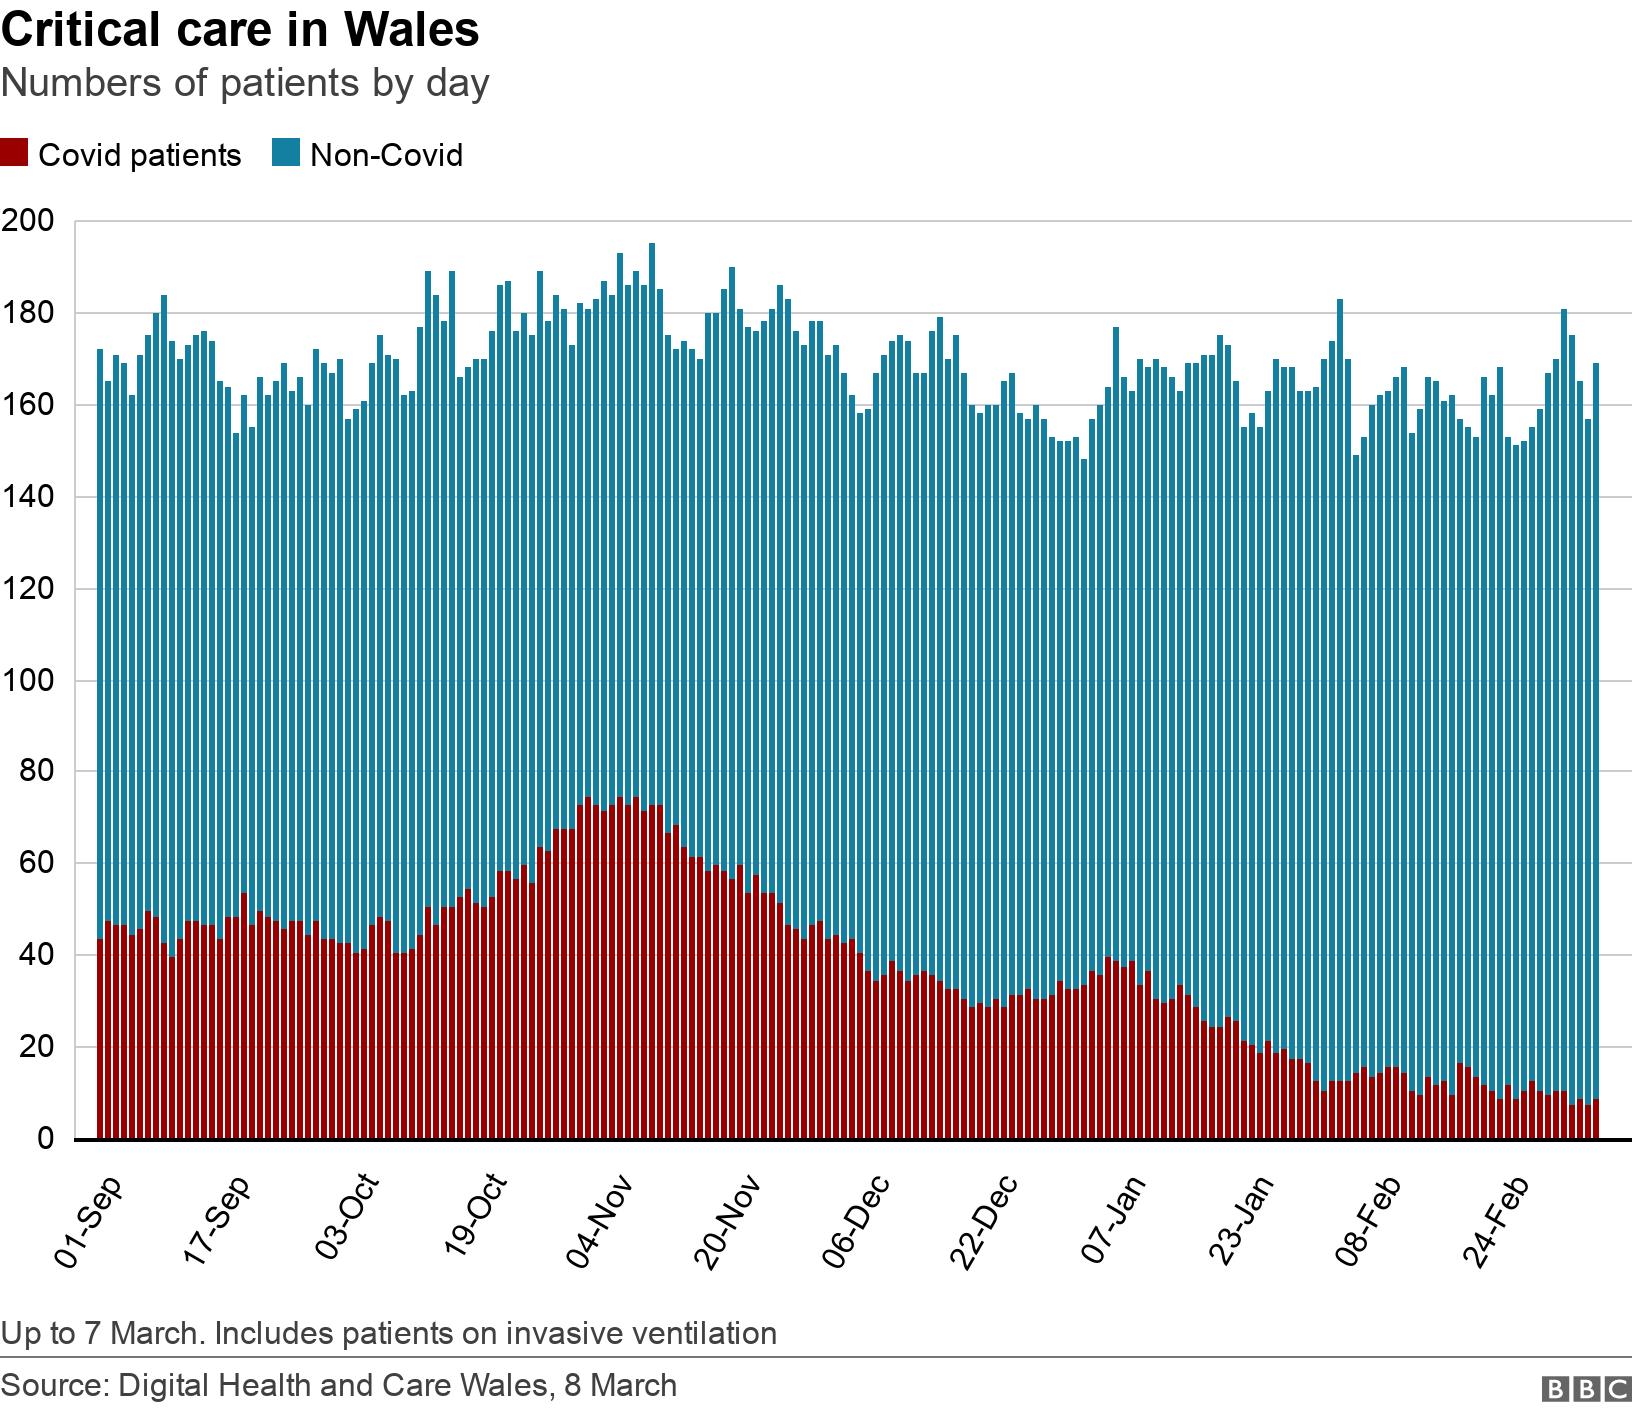 Critical care in Wales. Numbers of patients by day.  Up to 7 March. Includes patients on invasive ventilation.